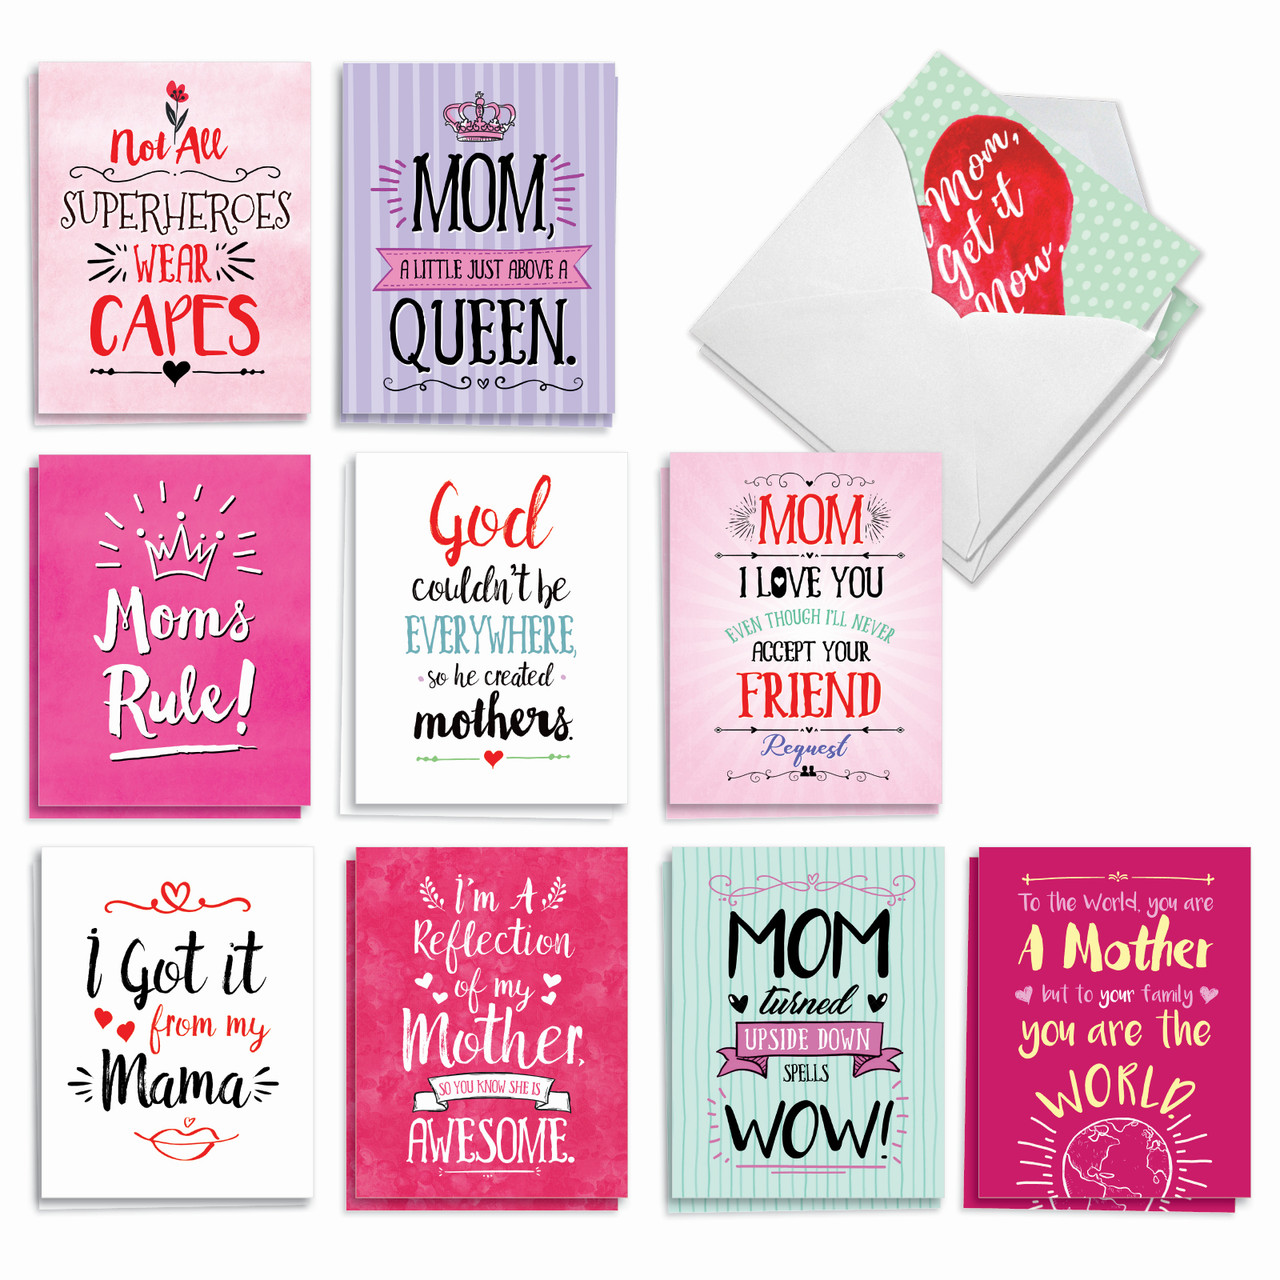 Assorted Mini Note Cards